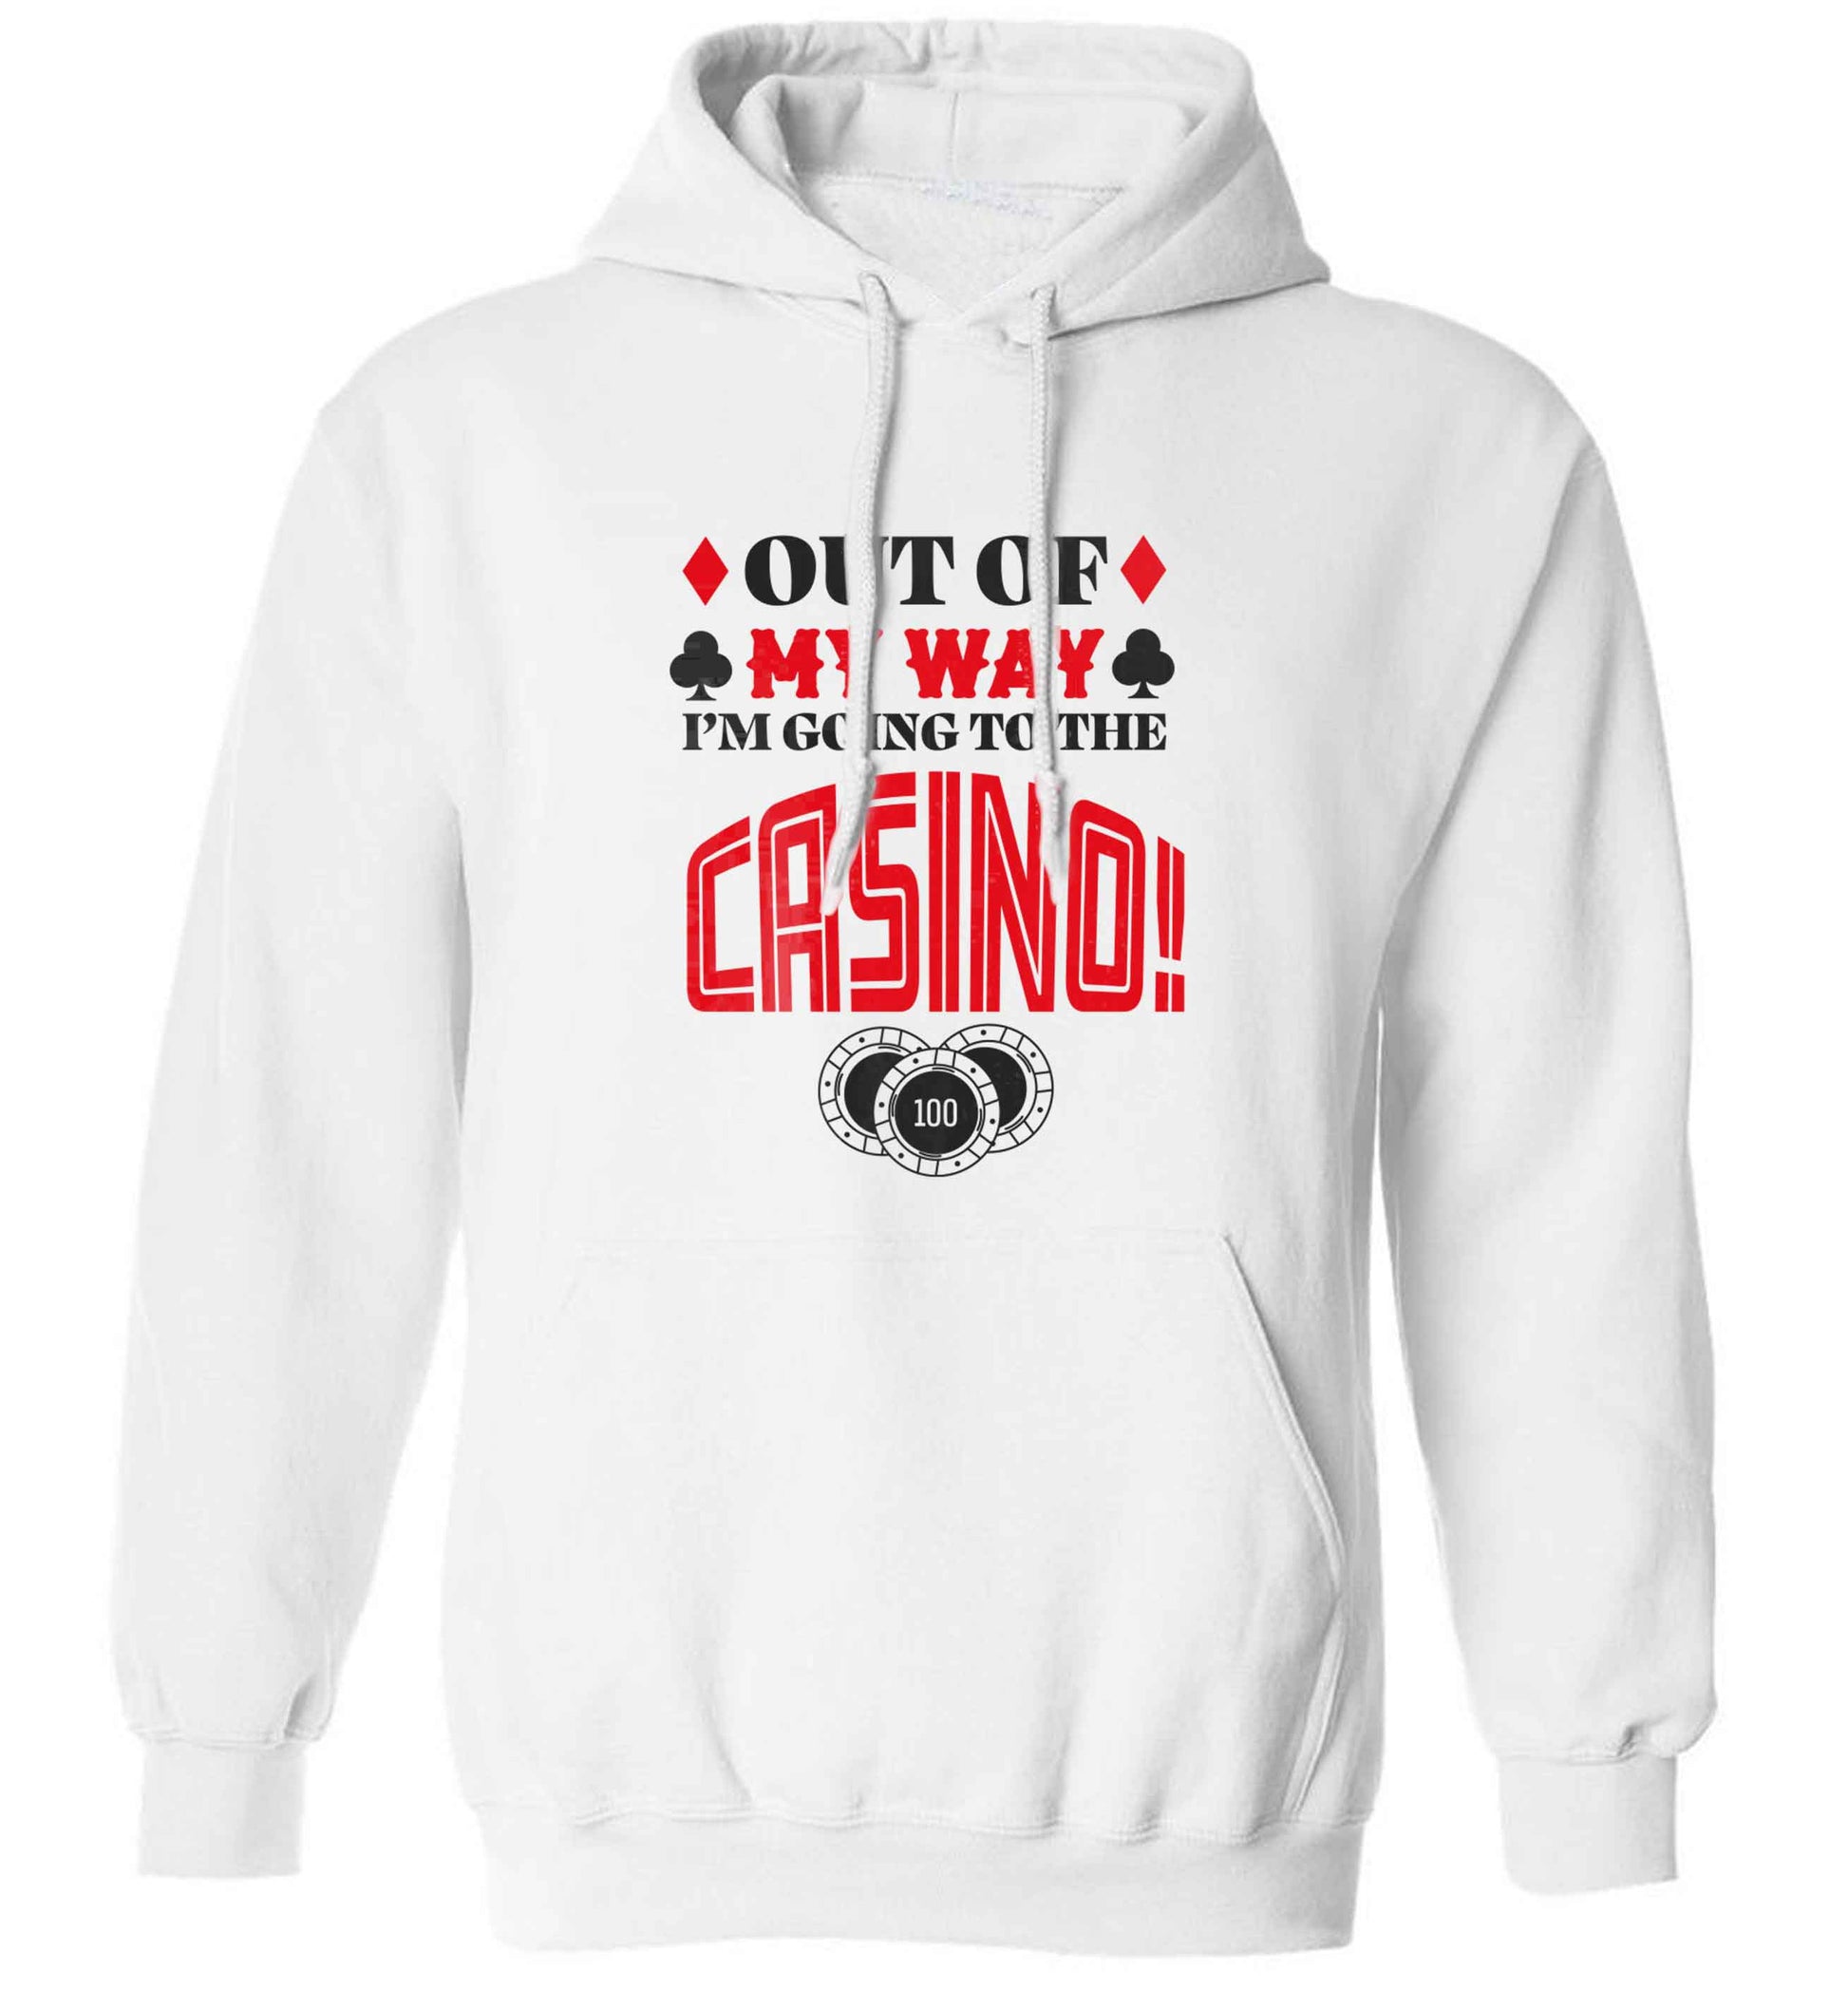 Out of my way I'm going to the casino adults unisex white hoodie 2XL